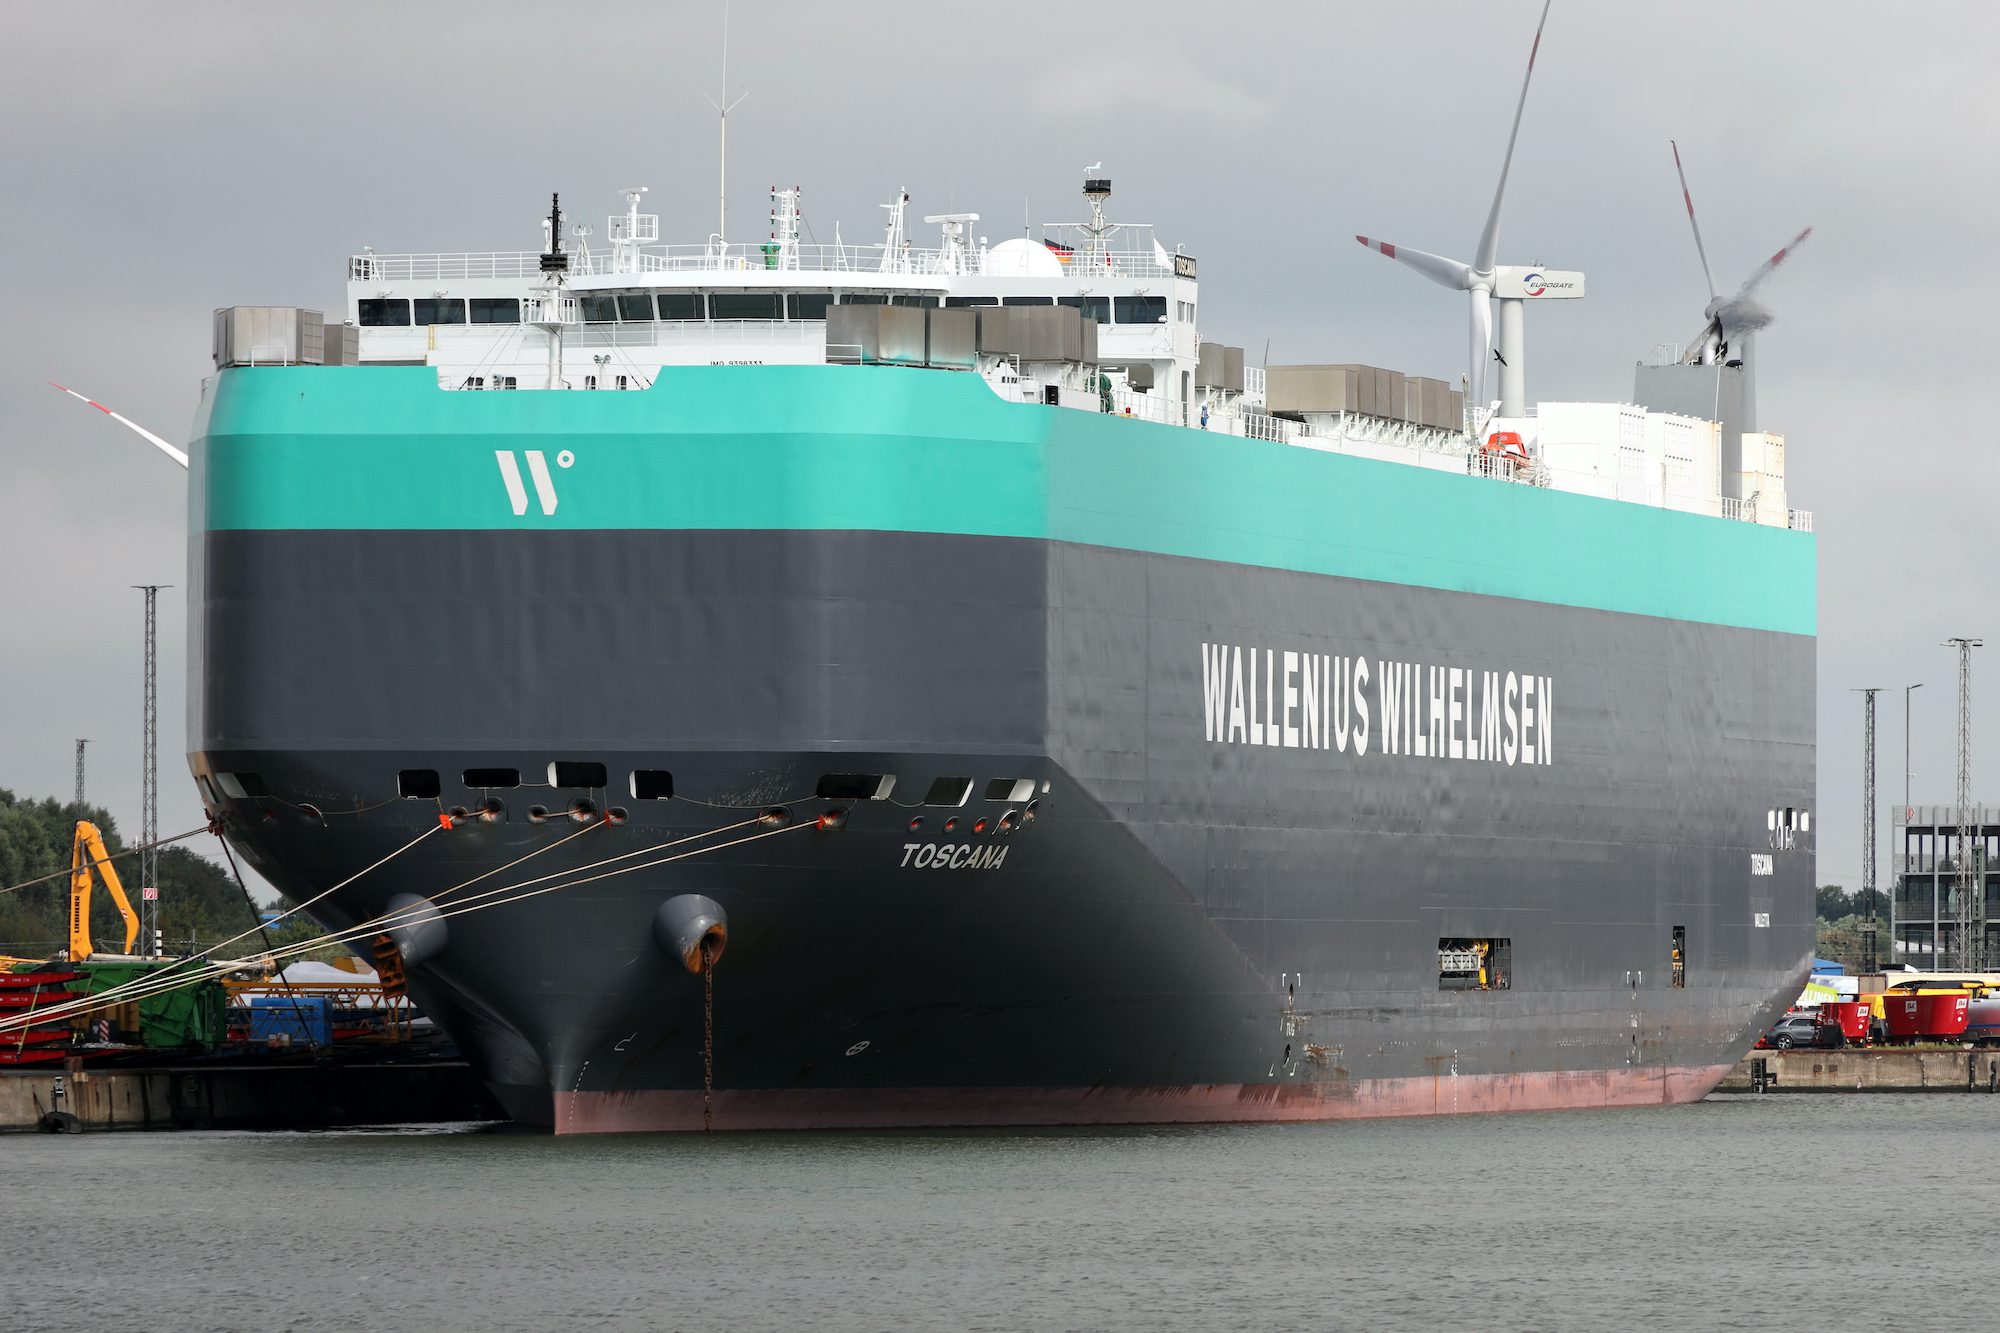 Wallenius Wilhelmsen Reports Strong Q4 Earnings Amid RoRo Sector Recovery